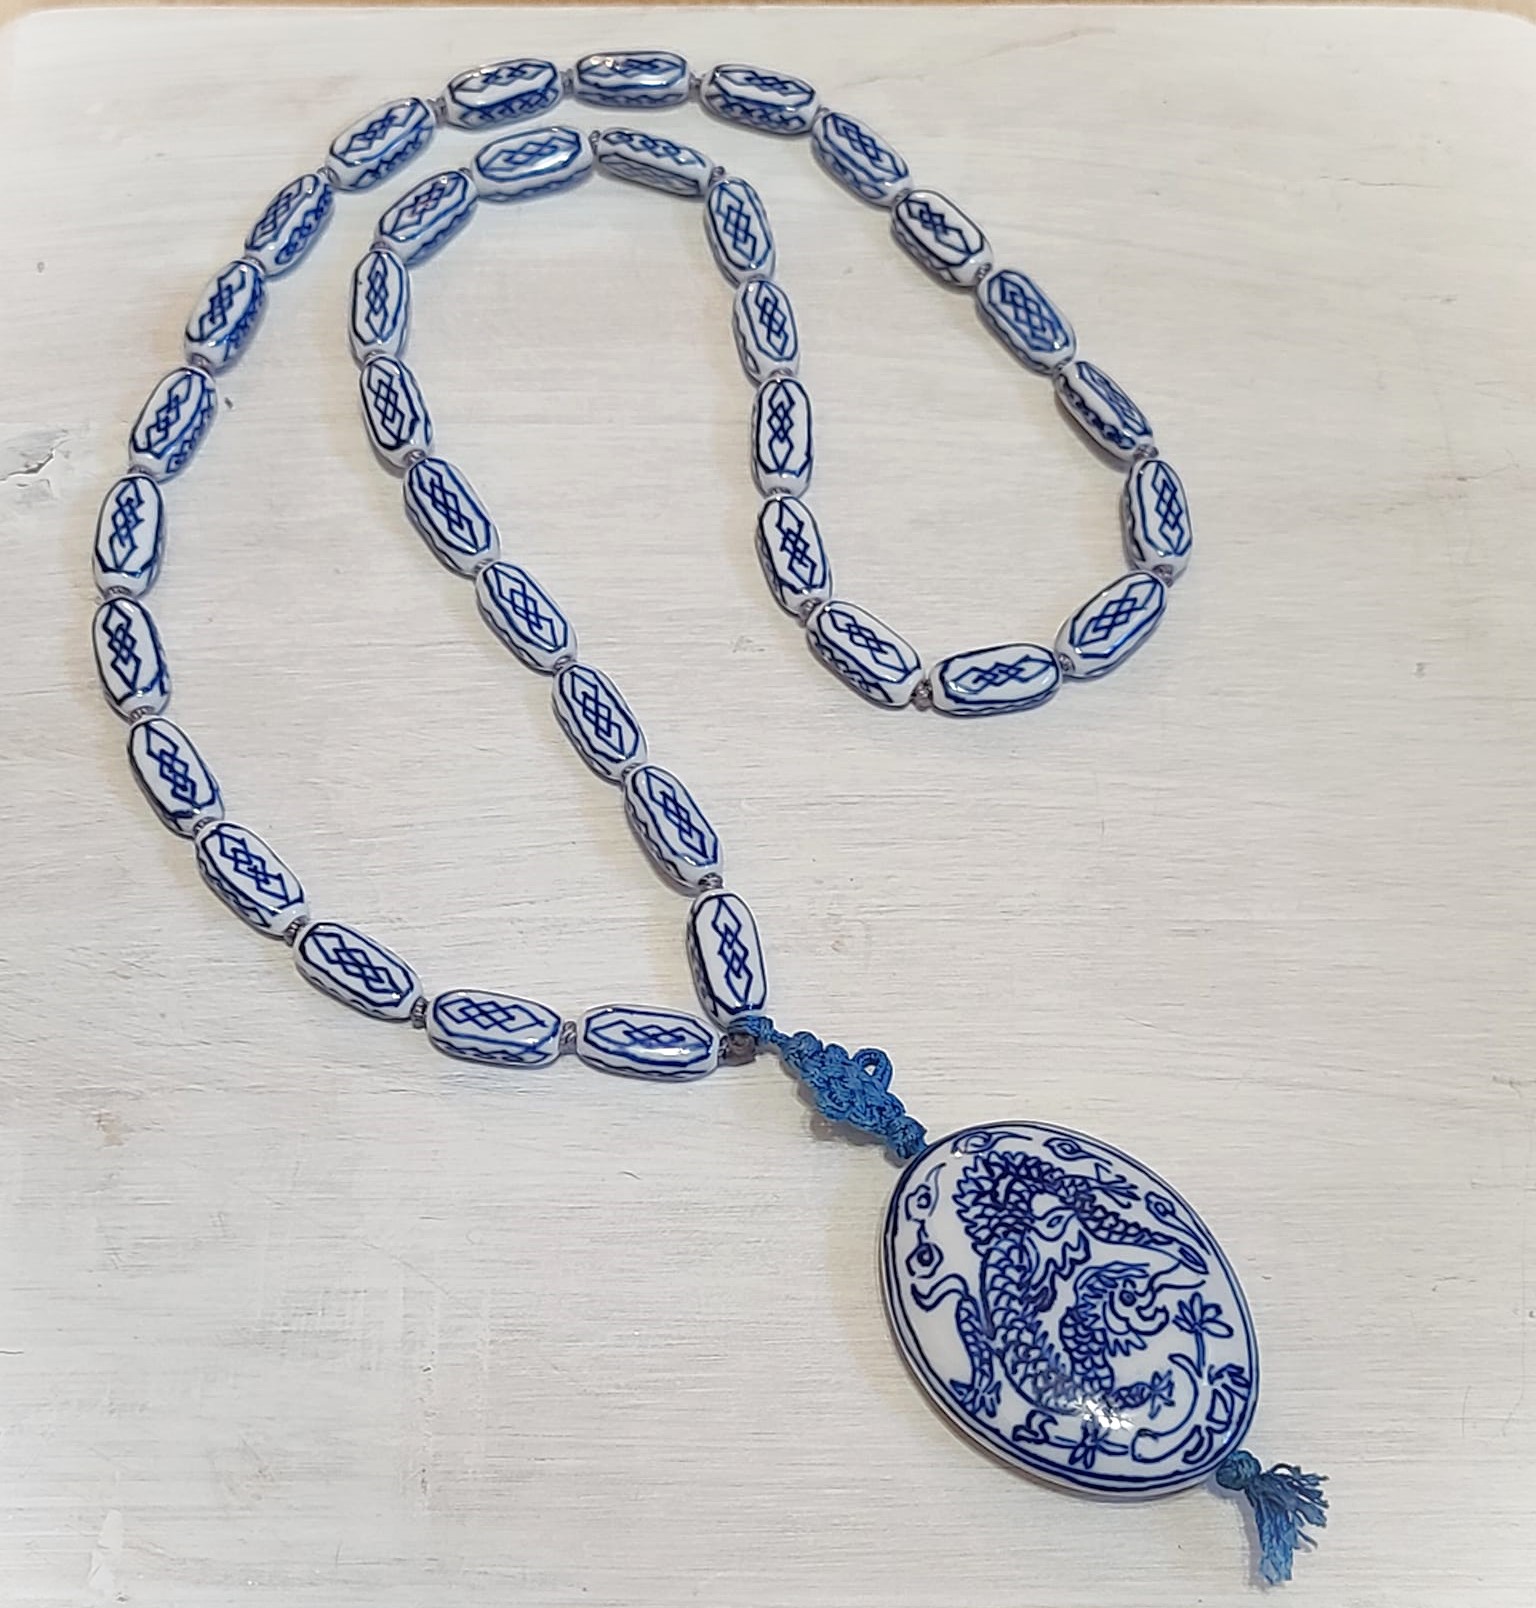 Asian ceramic beaded necklace with hanging dragon motif pendant